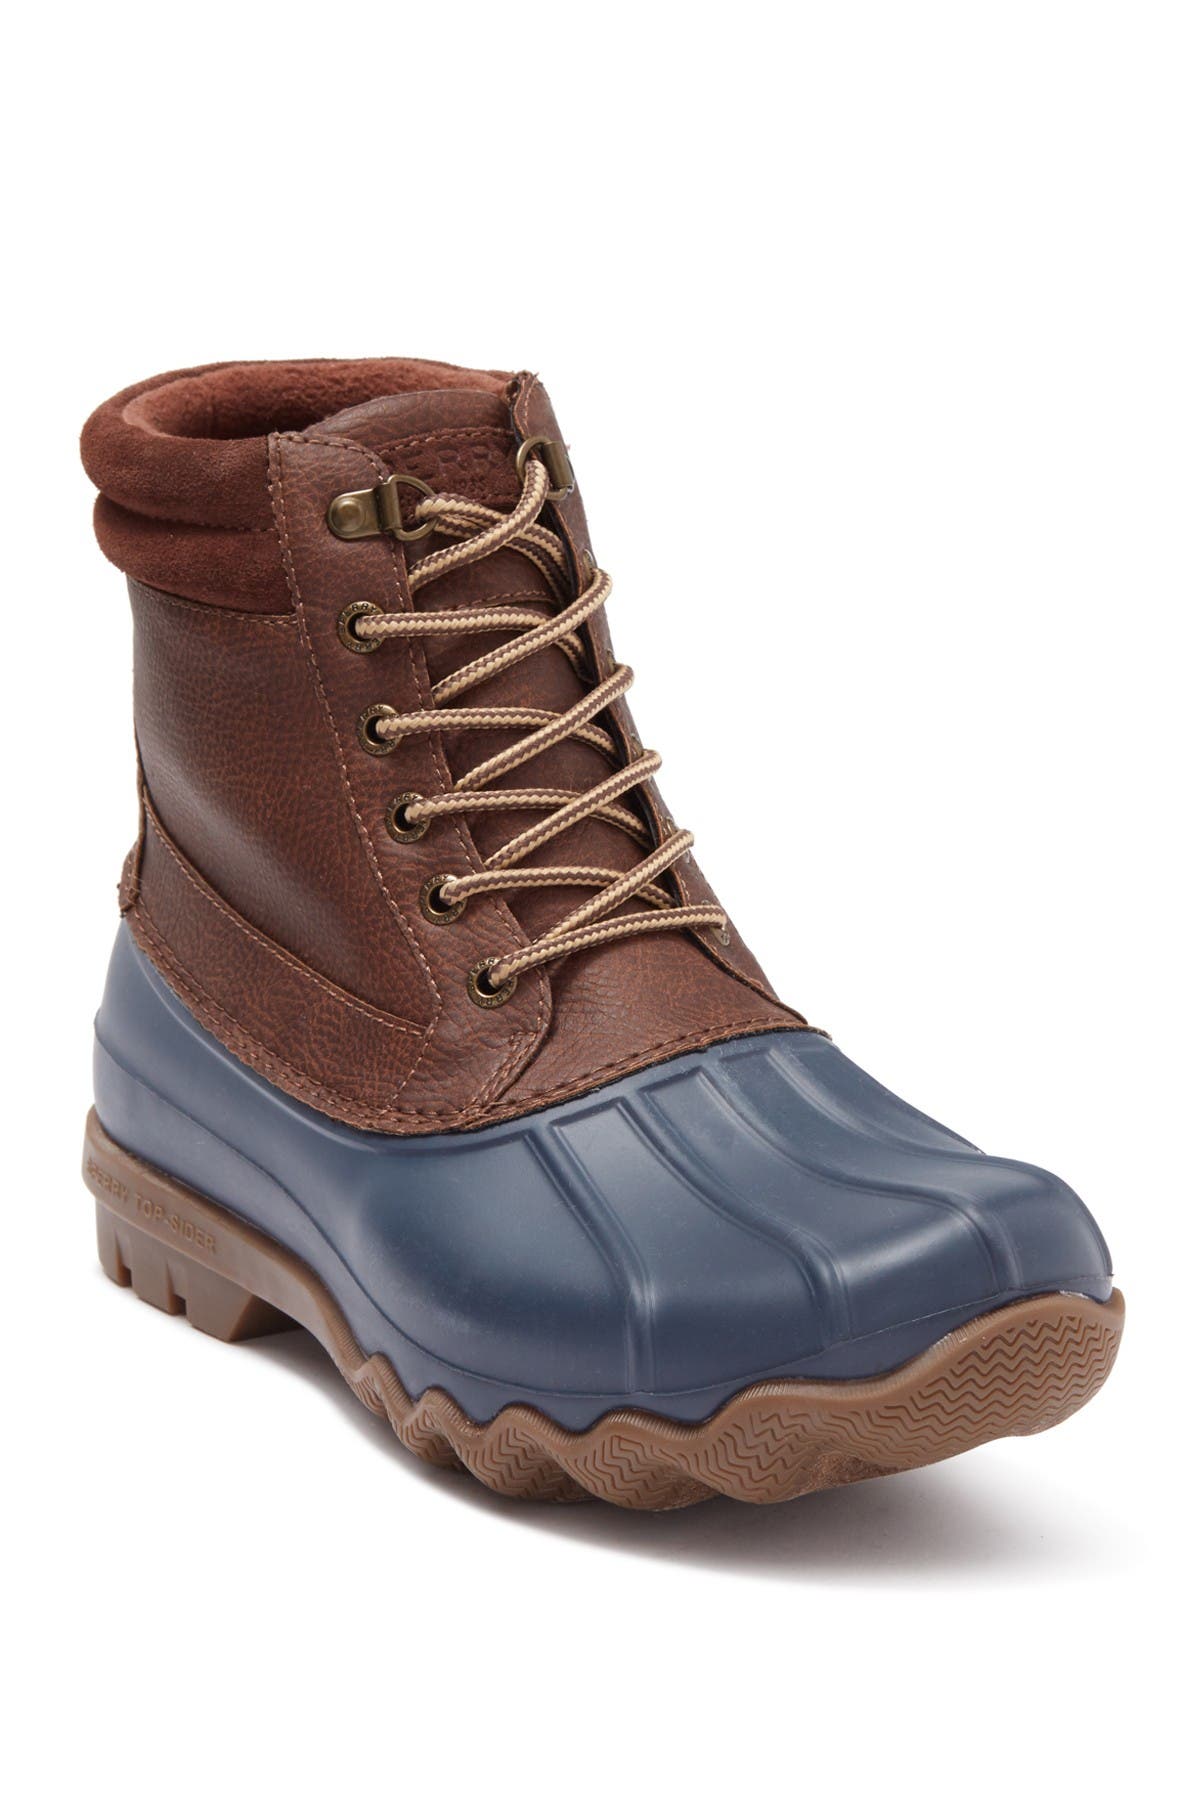 sperry brewster boot